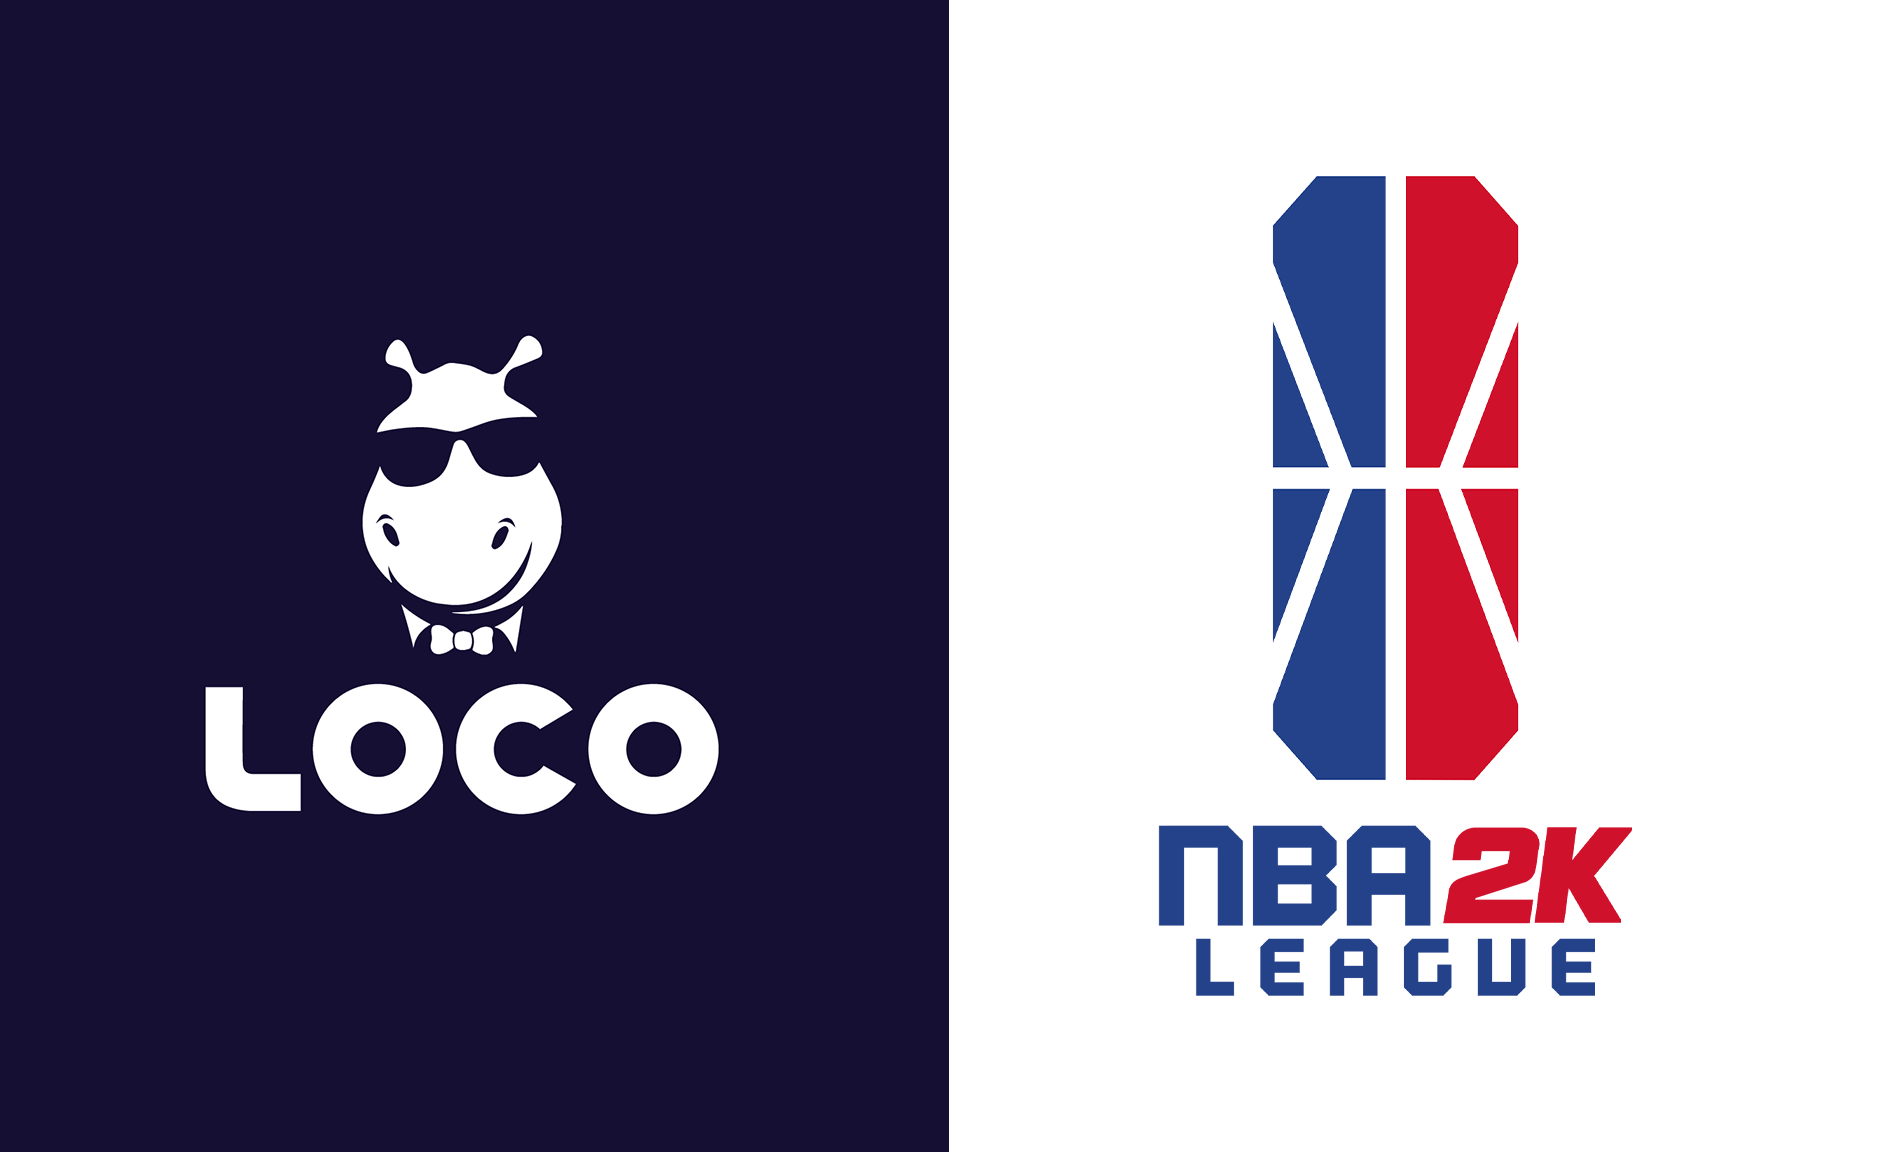 Indian streaming platform Loco retains NBA 2K League broadcasting rights